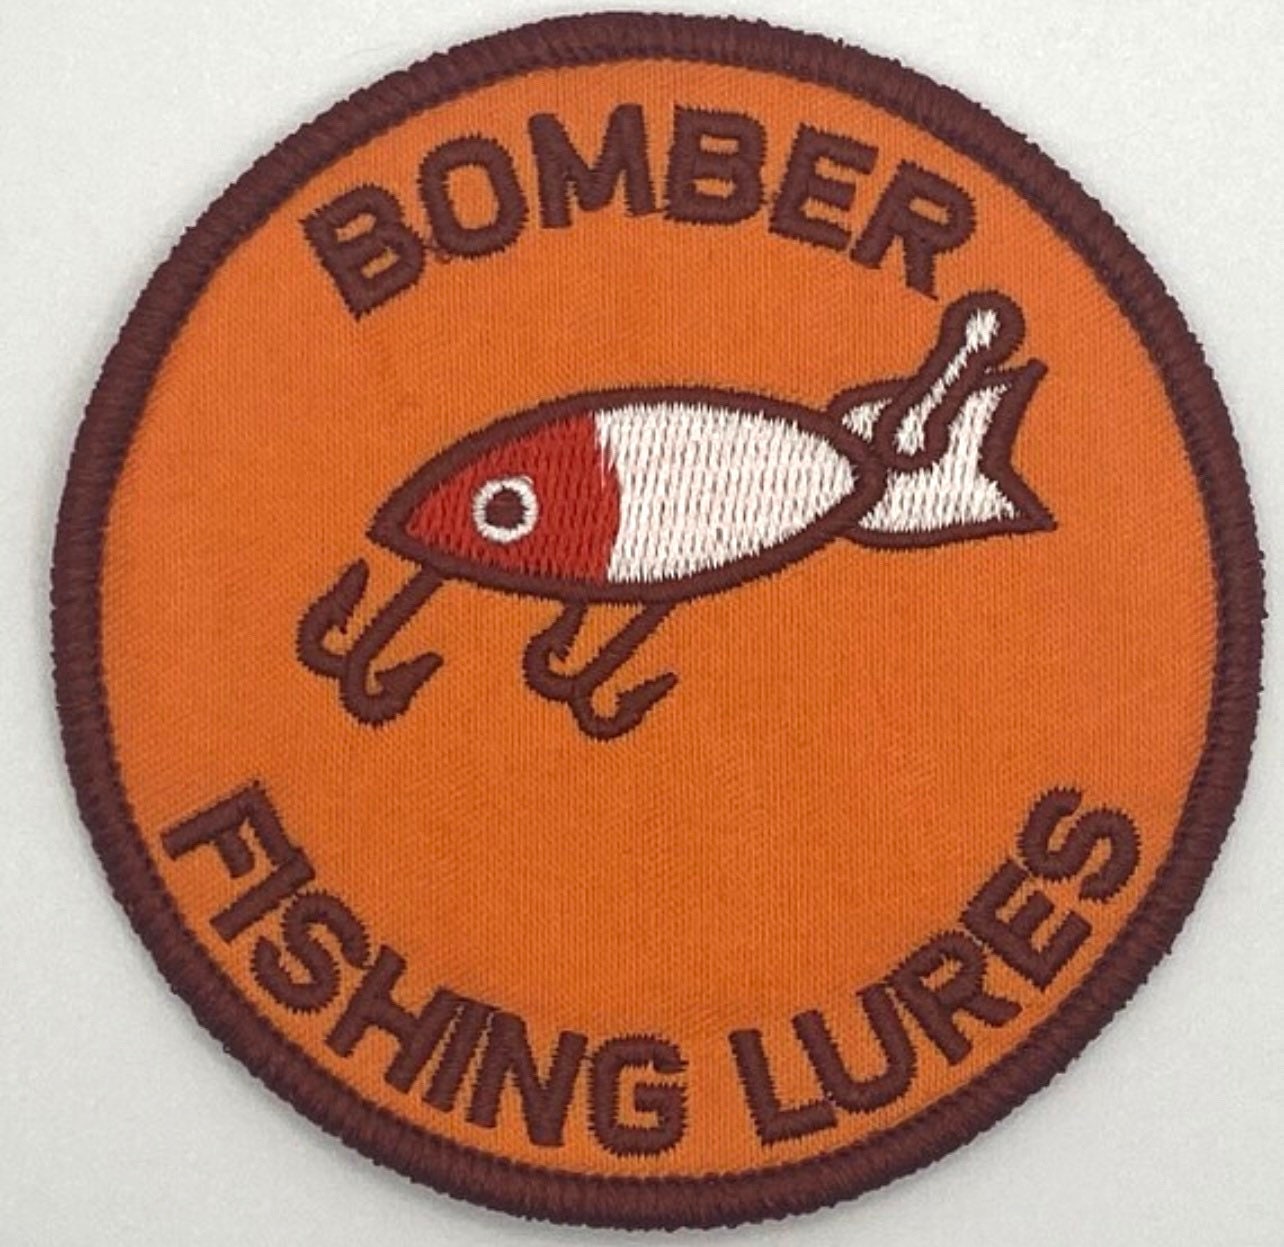 Buy Bomber Fishing Lures Orange Patch Vintage Style Retro Sew Iron Patch  Hat Cap Online in India 